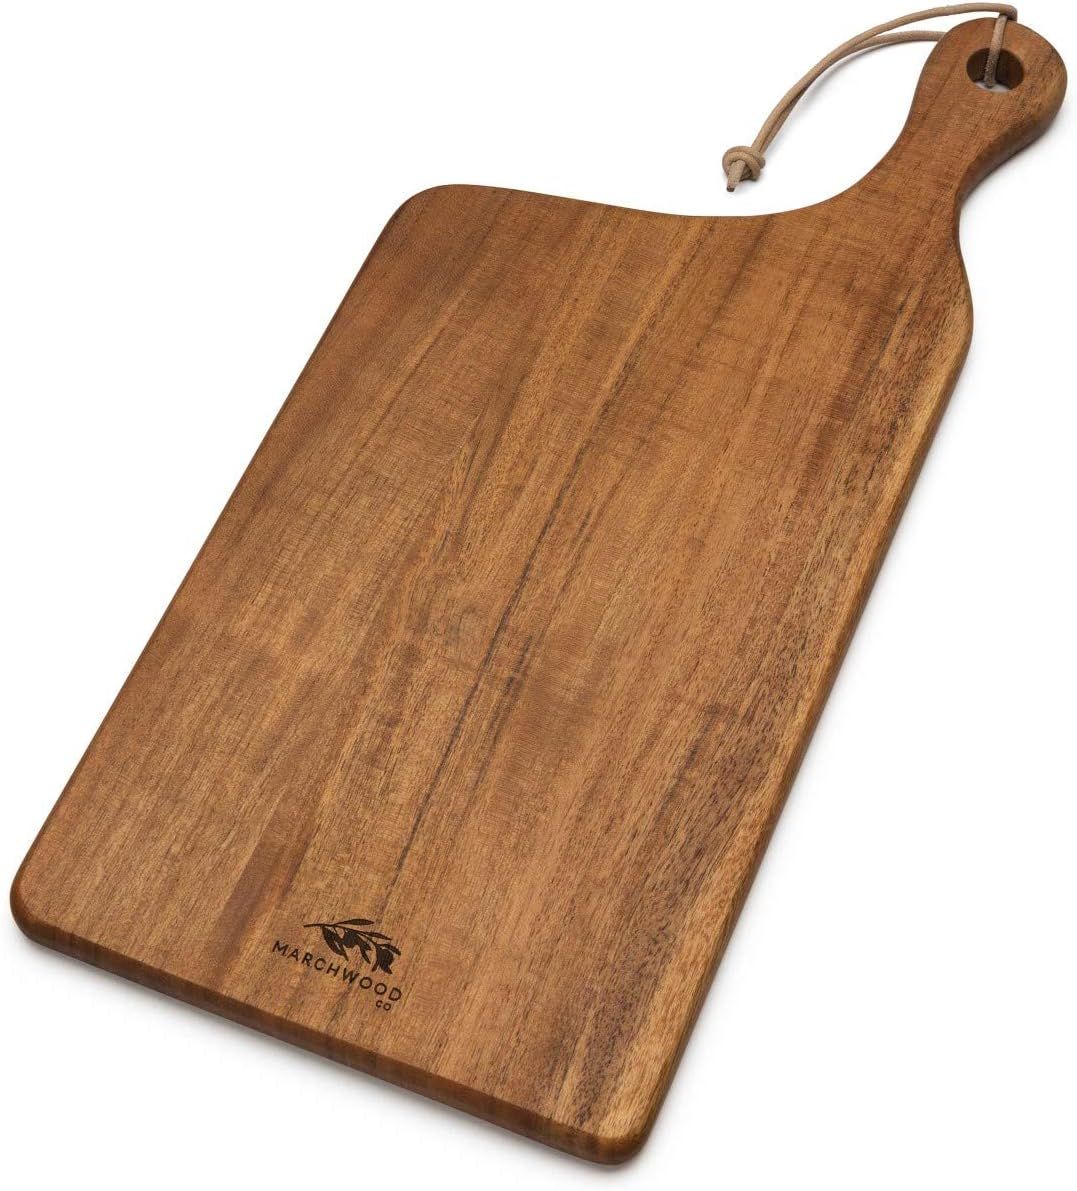 Marchwood Co Acacia Wood Cutting and Serving Board with Handle - 18” x 8” for Cheese, Bread, ... | Amazon (US)